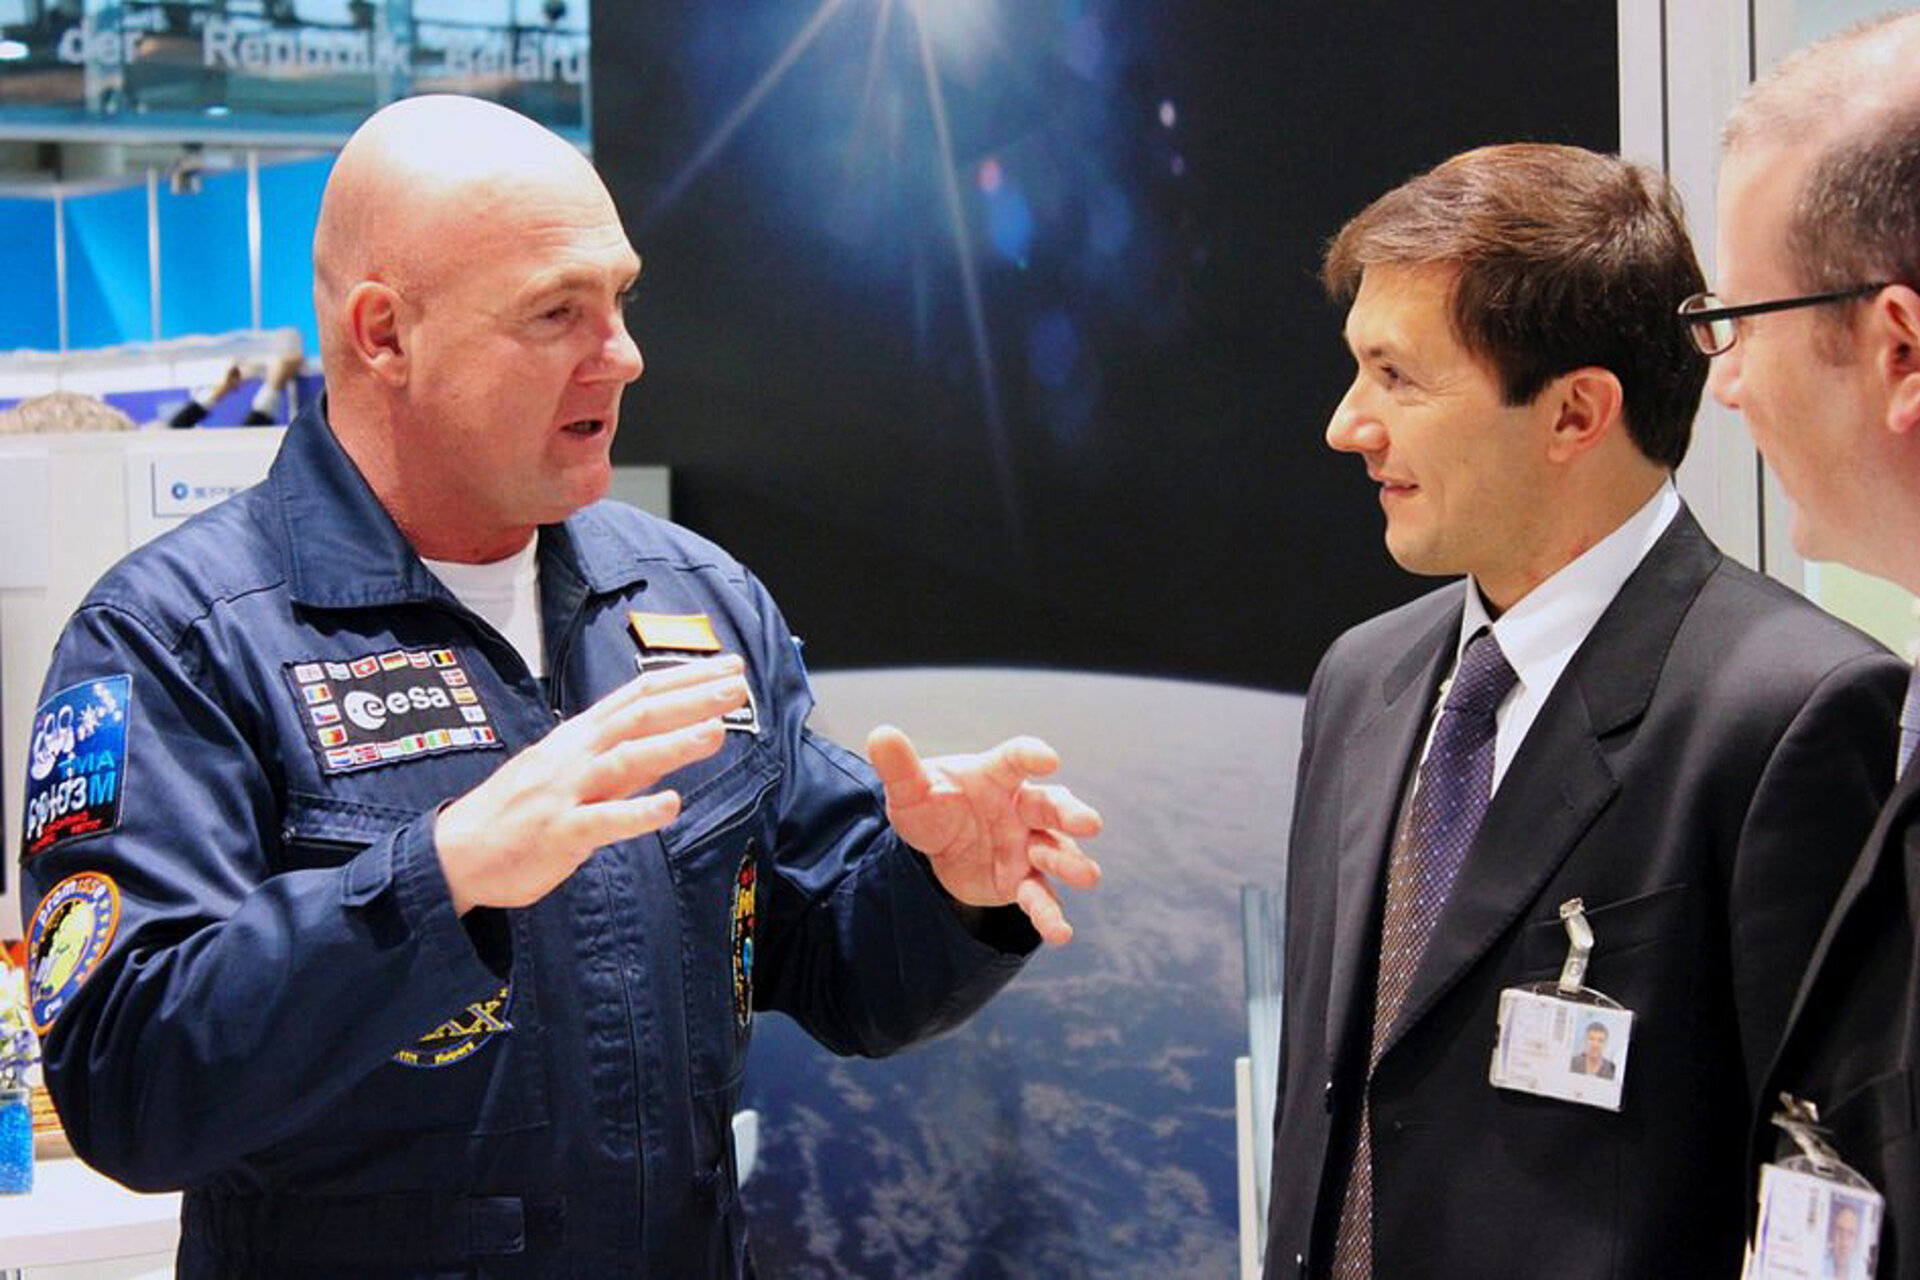 ESA astronaut André Kuipers at ESA-CERN stand